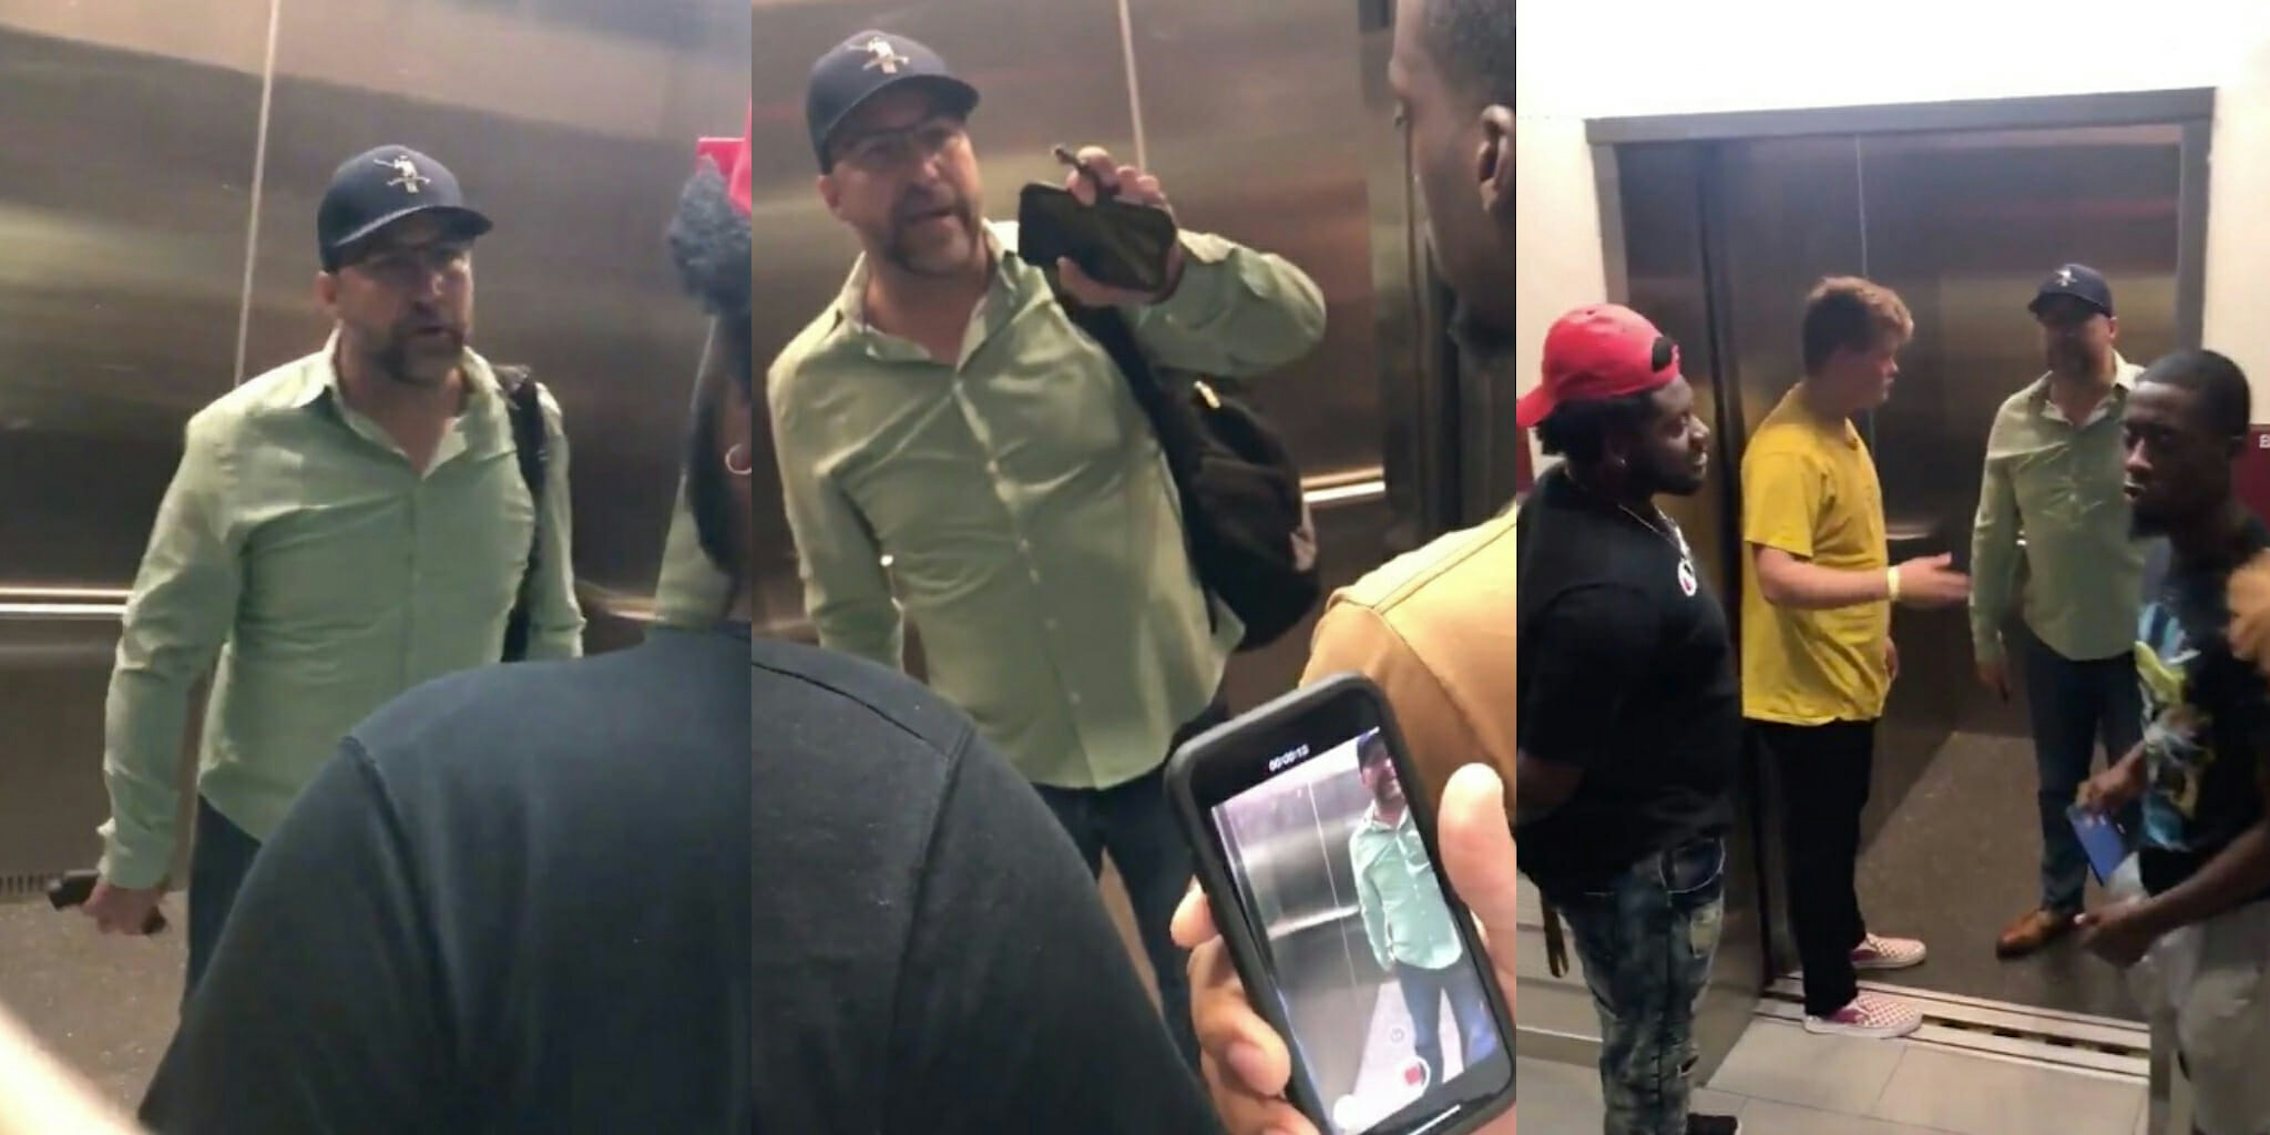 A white man, Don Crandall, pulls a gun out on Black Florida A&M University students in an apartment complex elevator.